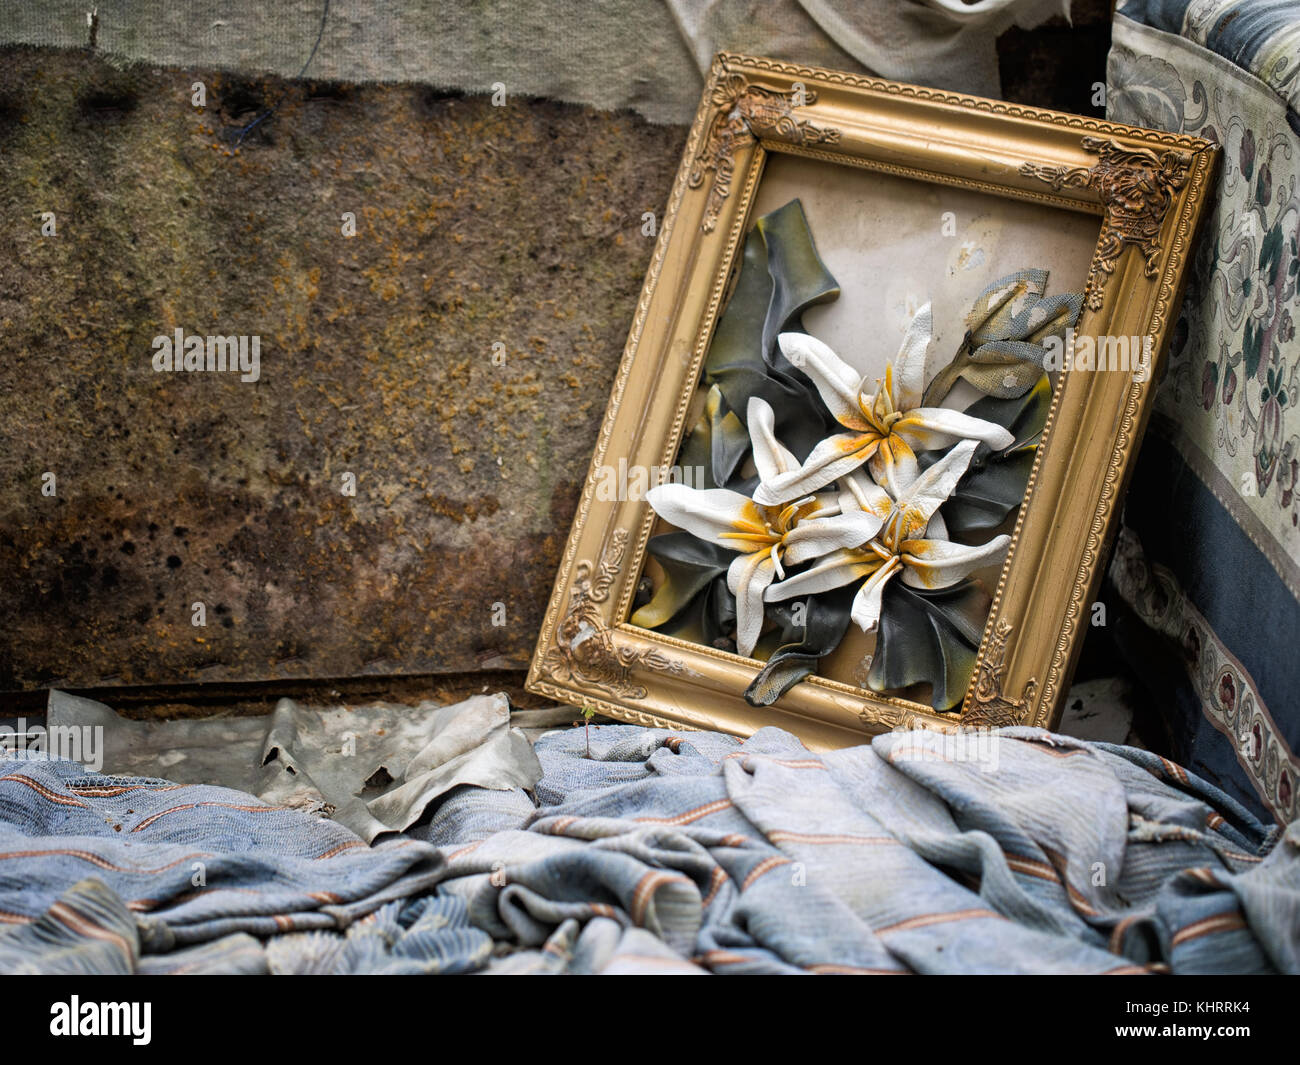 Picture on sofa, abandoned and rotting. Sad decay. Stock Photo